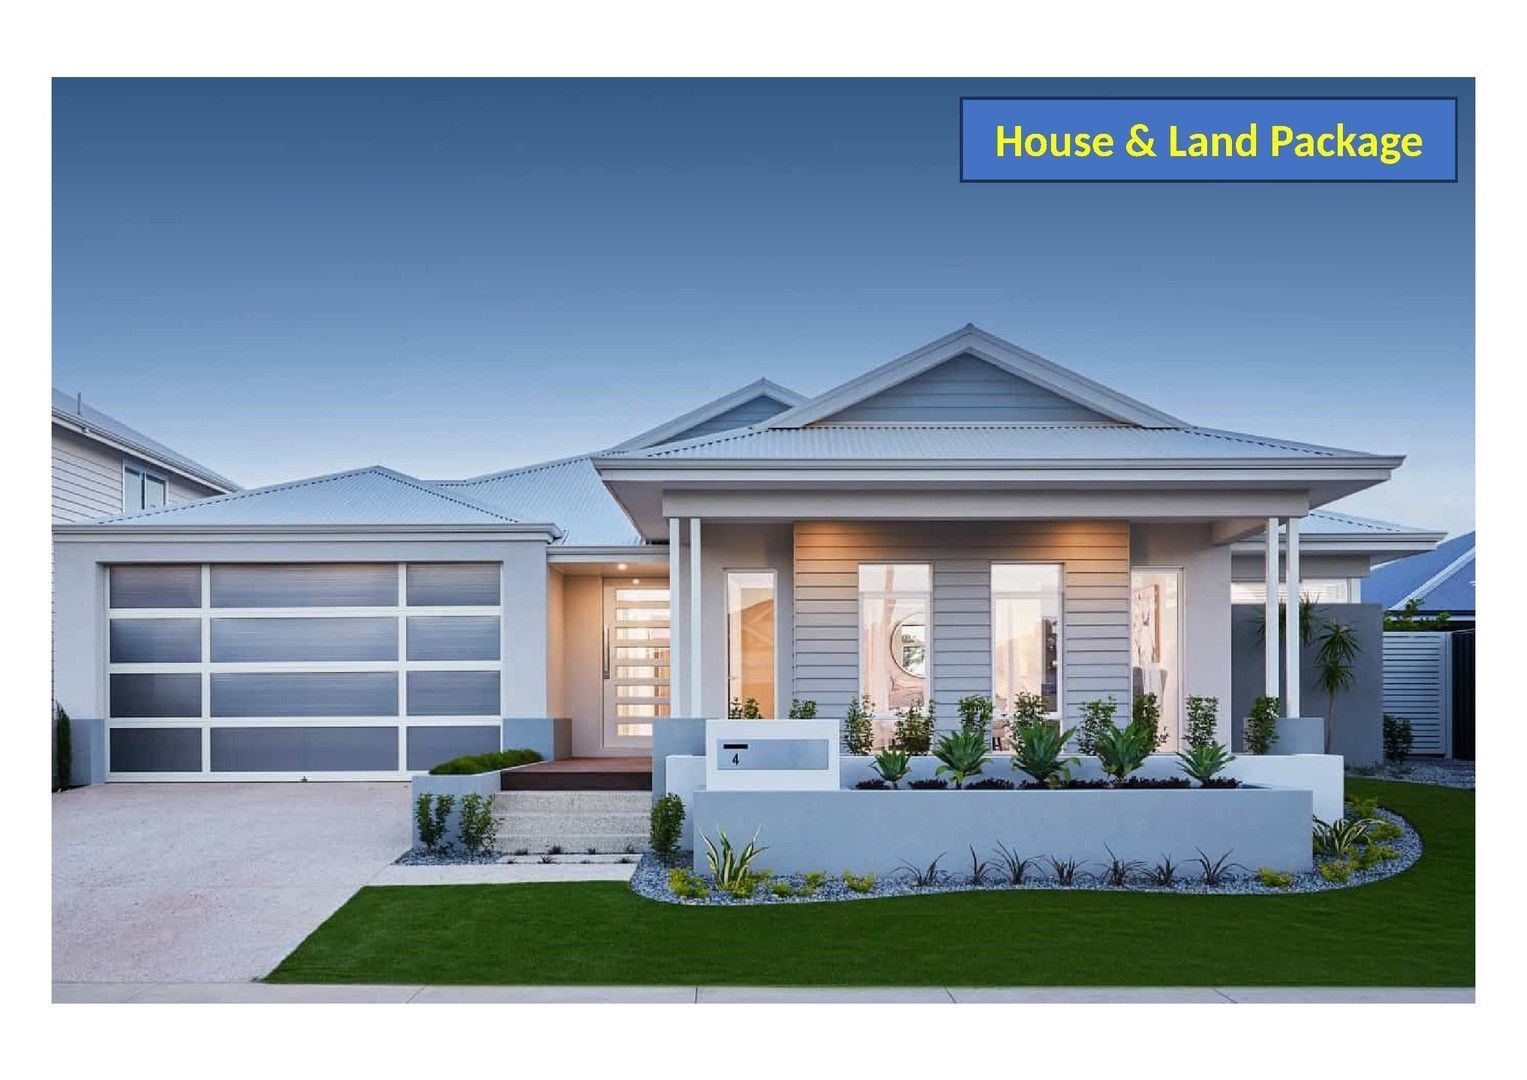 3 bedrooms New House & Land in Lot 213 Warlander View FORRESTDALE WA, 6112